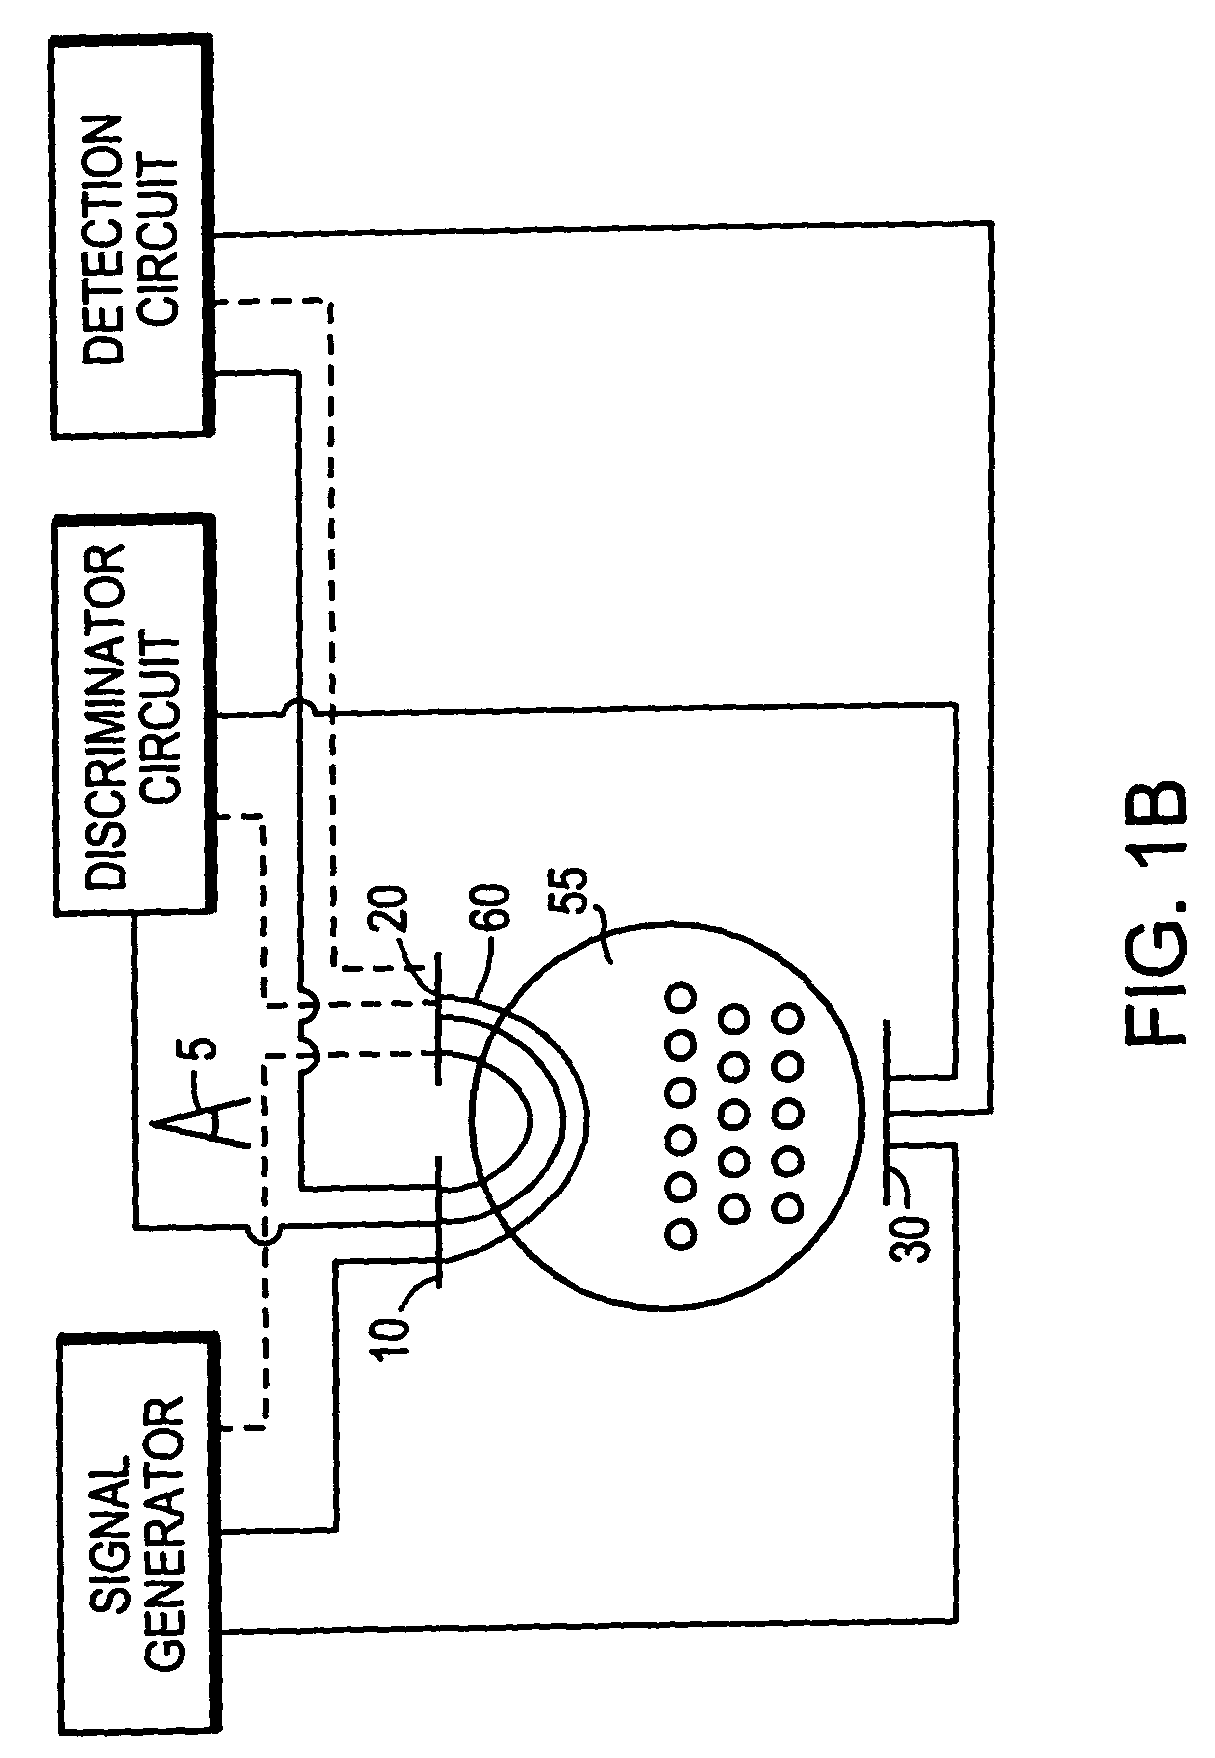 Method and apparatus for determining properties of an electrophoretic display